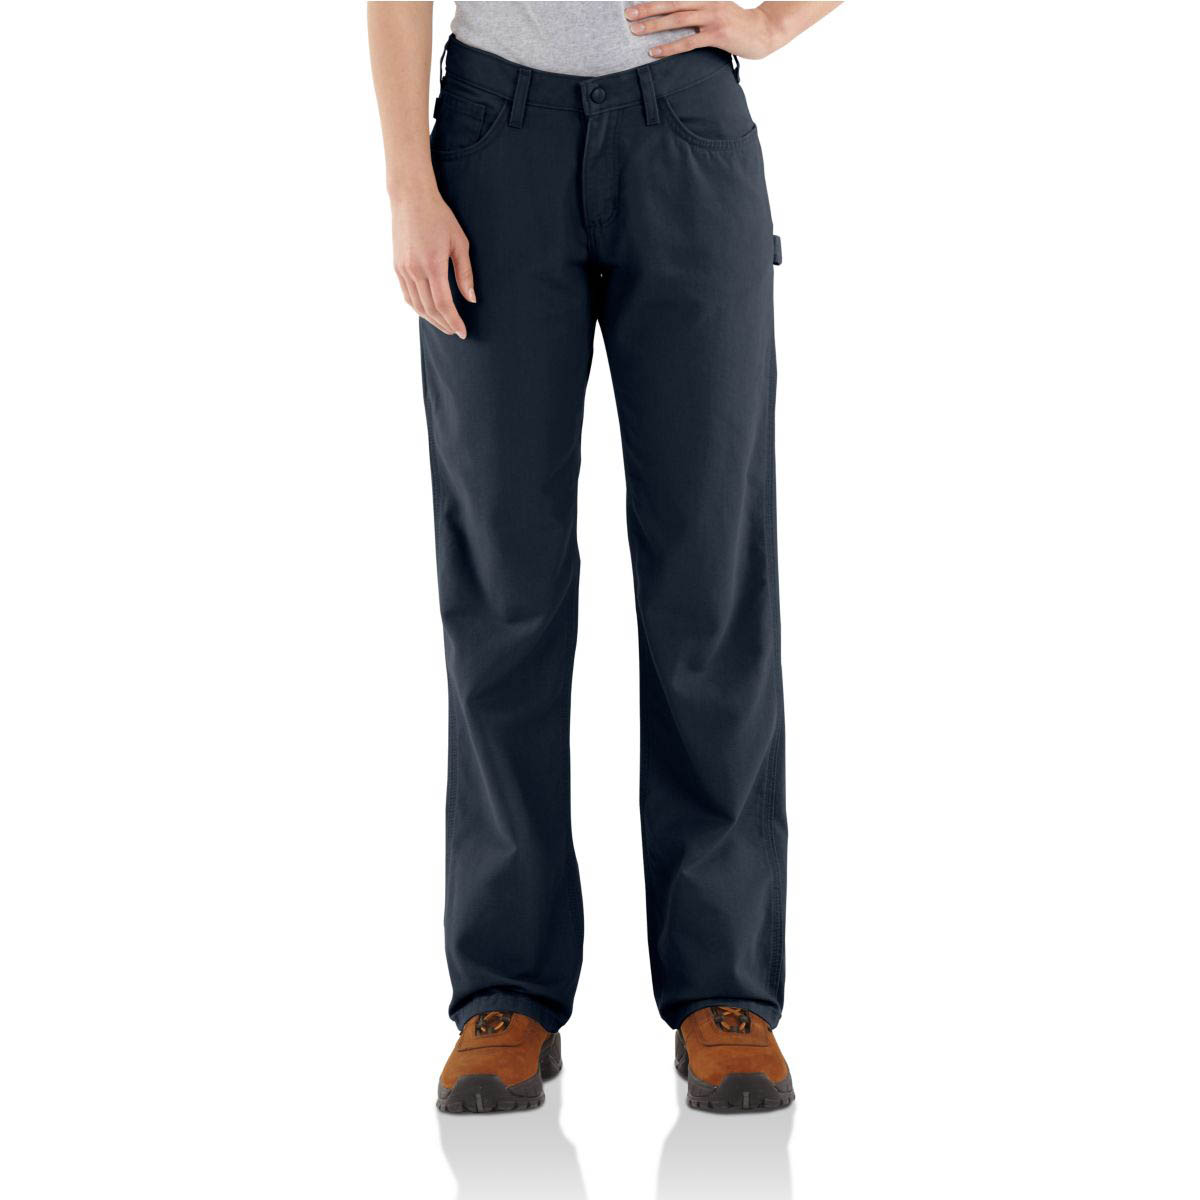 Carhartt Women's Flame Resistant Canvas Work Pant